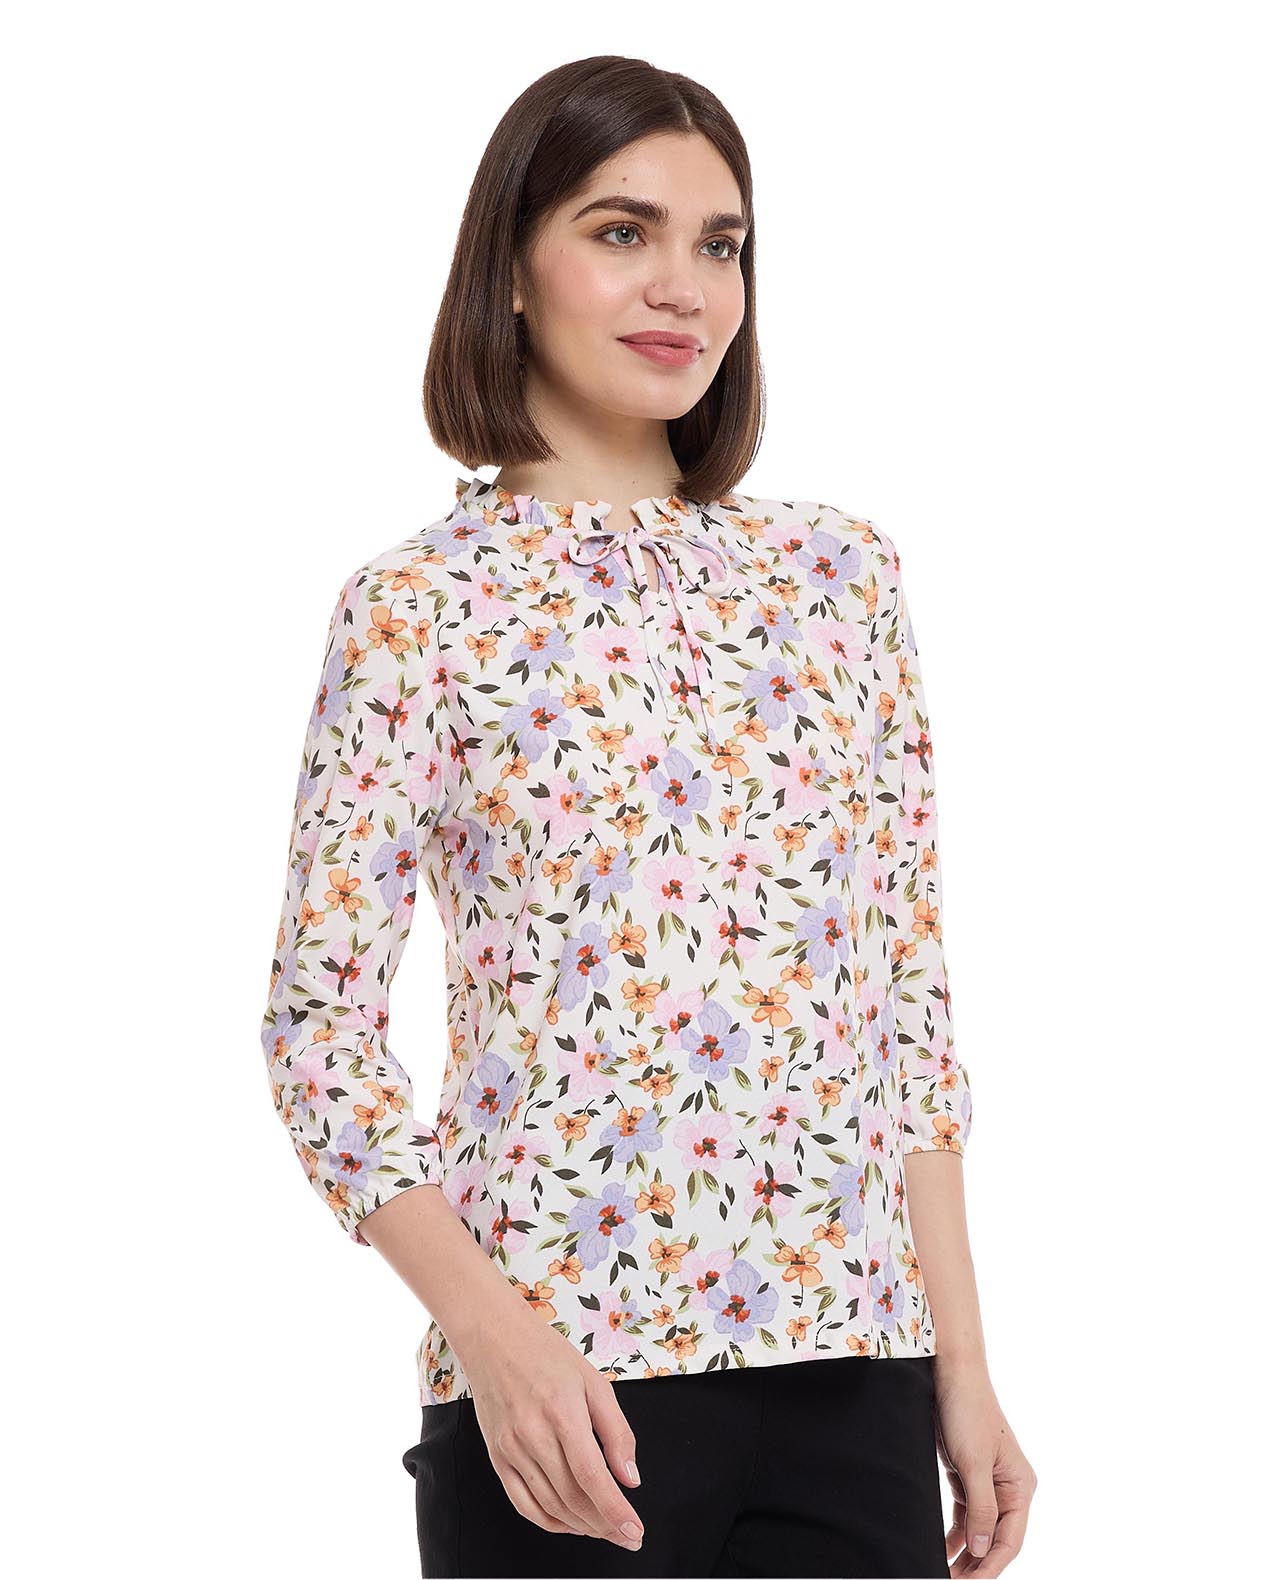 Floral Patterned Top with Tie-Up Neck and 3/4 Sleeves